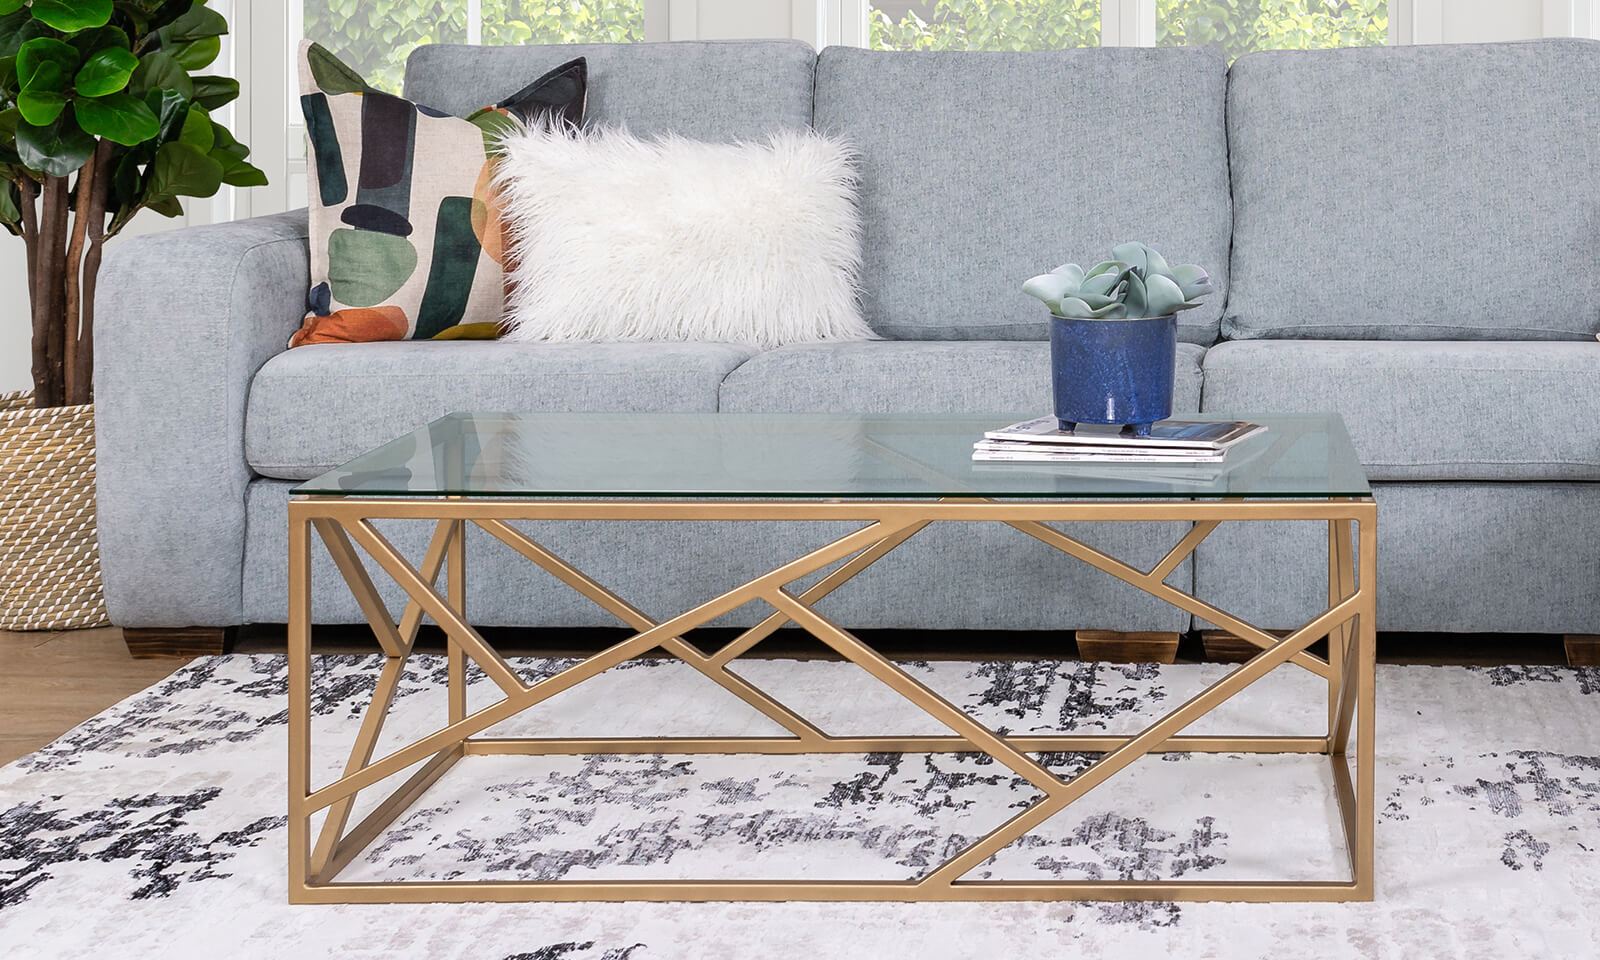 Reasons Why You Should Buy A Glass Coffee Table